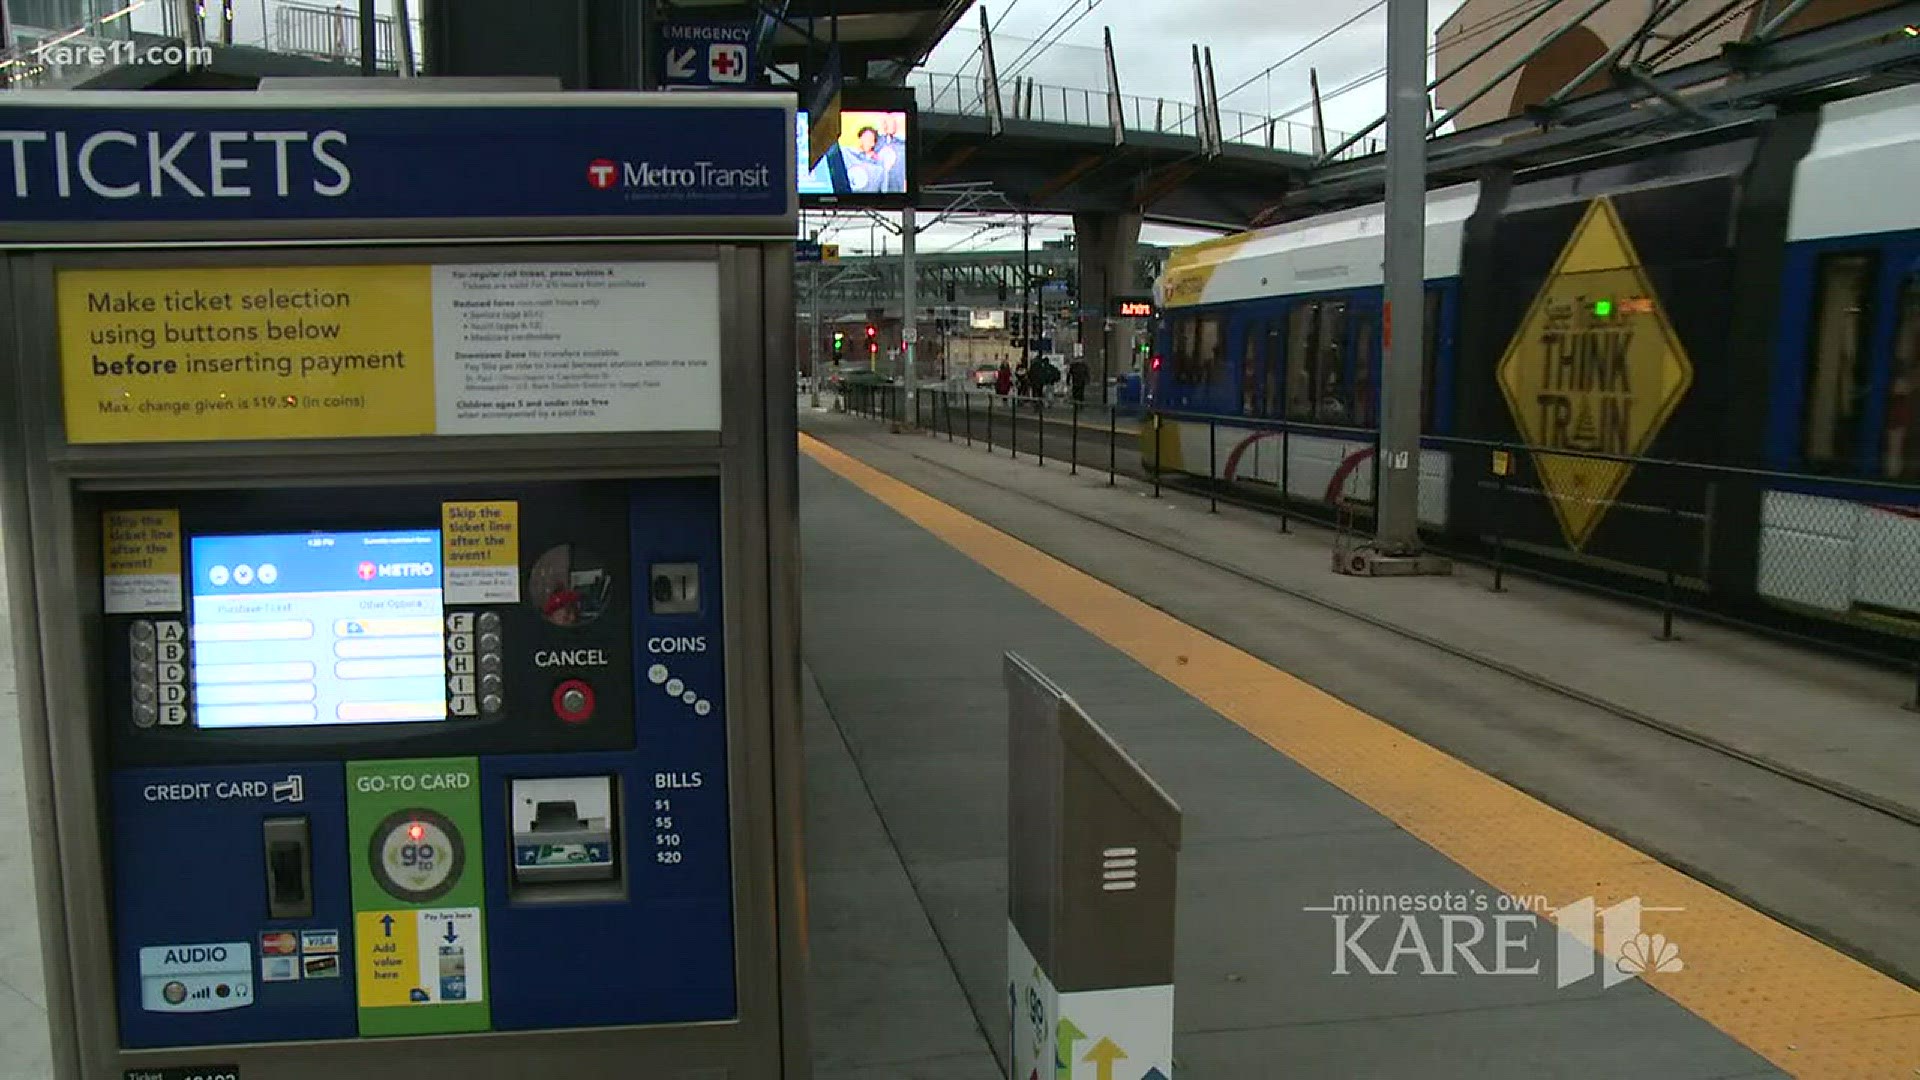 Some on social media are blasting Metro Transit after it was announced earlier this week that service on the light rail will be limited on Super Bowl Sunday. http://kare11.tv/2zKMtFV